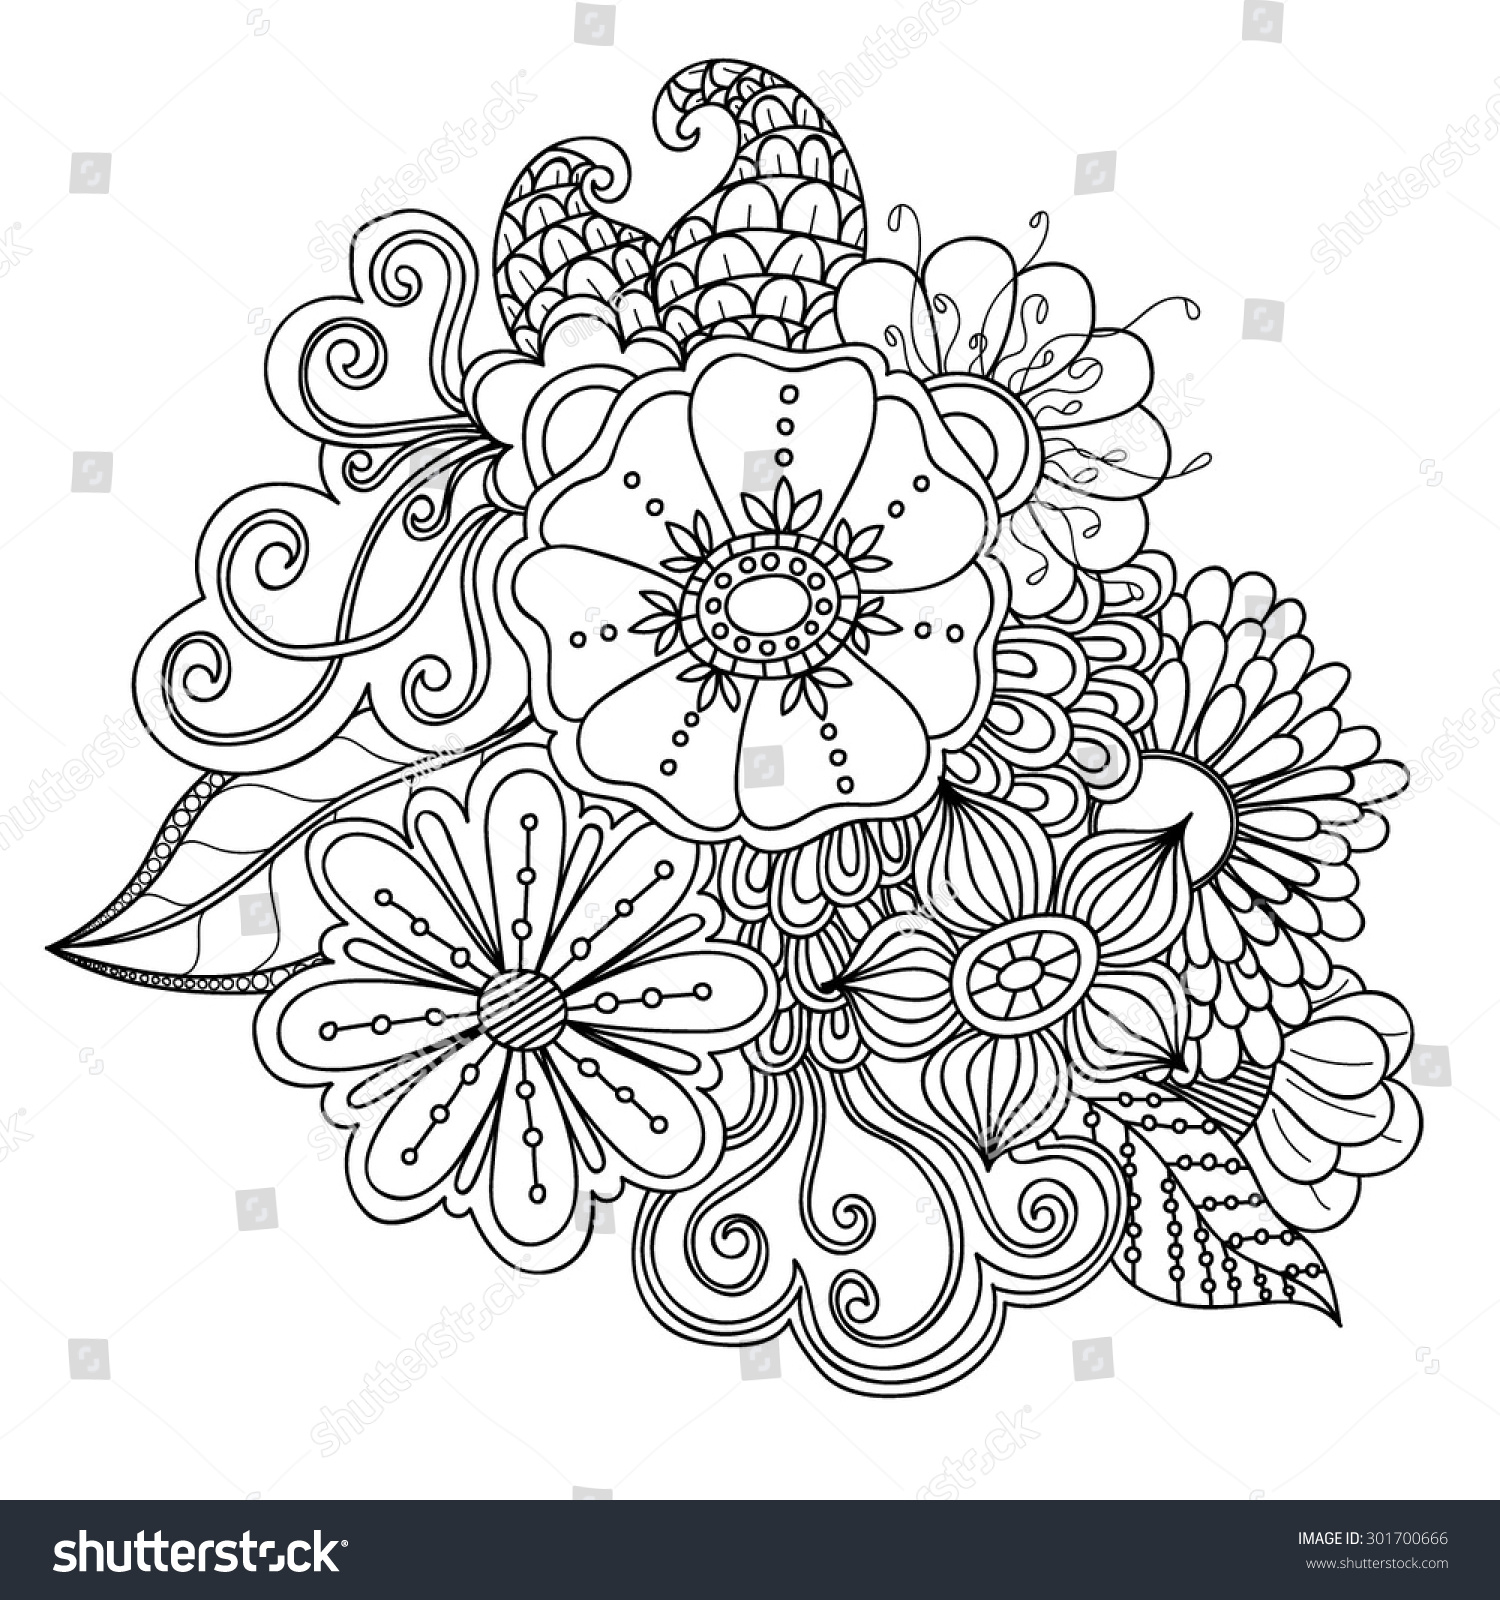 Royalty Free Doodle Art Flowers Zentangle Floral 301700666 Stock